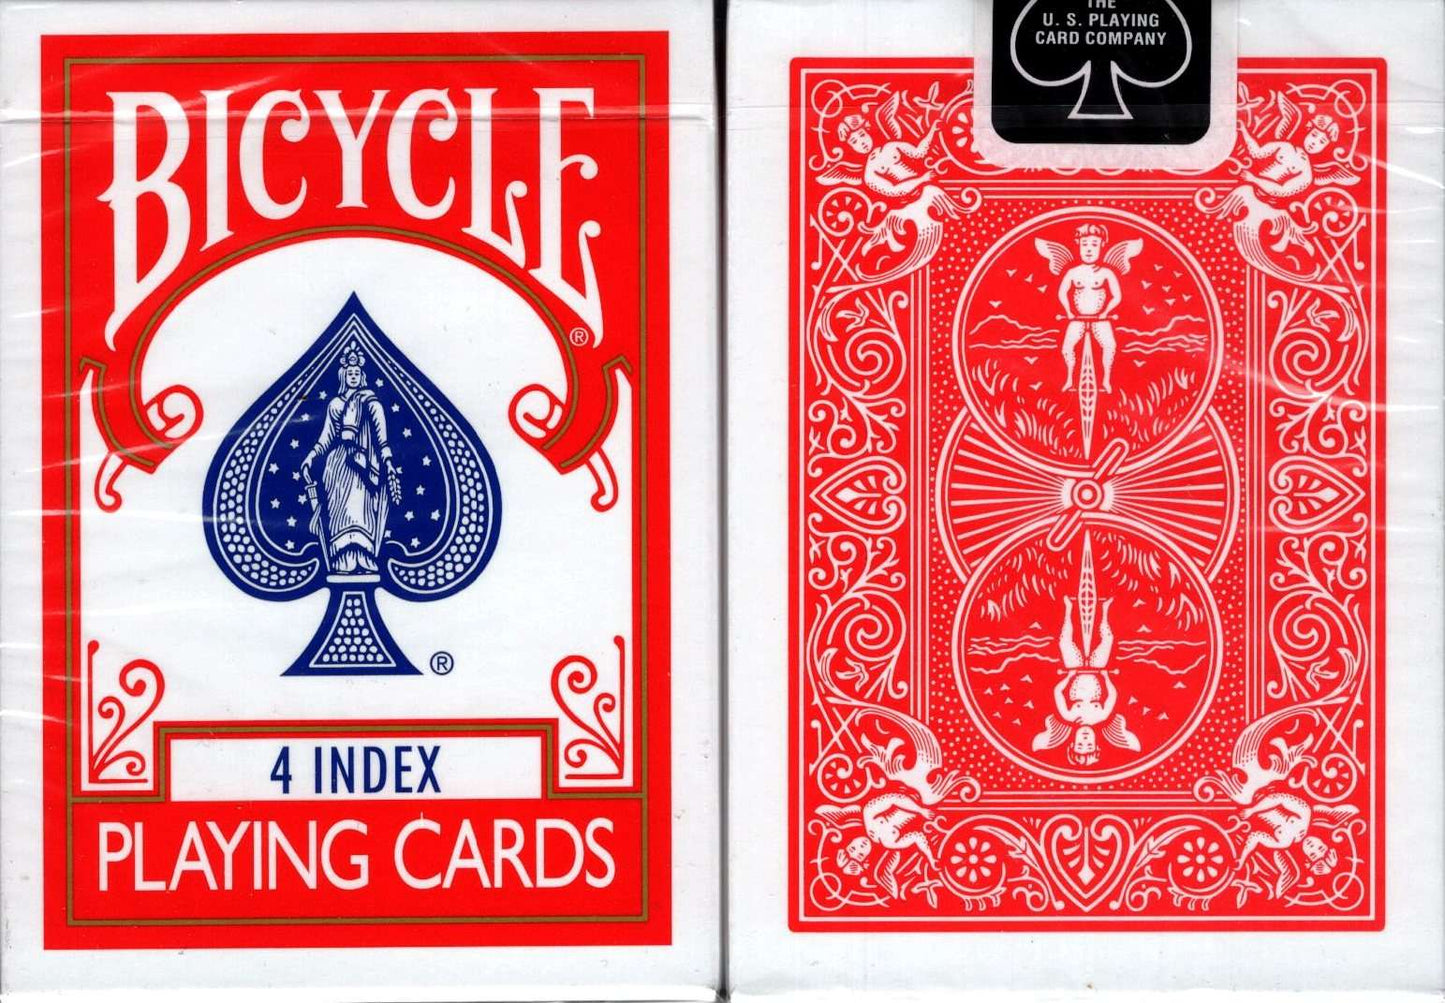 4 Index Bicycle Playing Cards